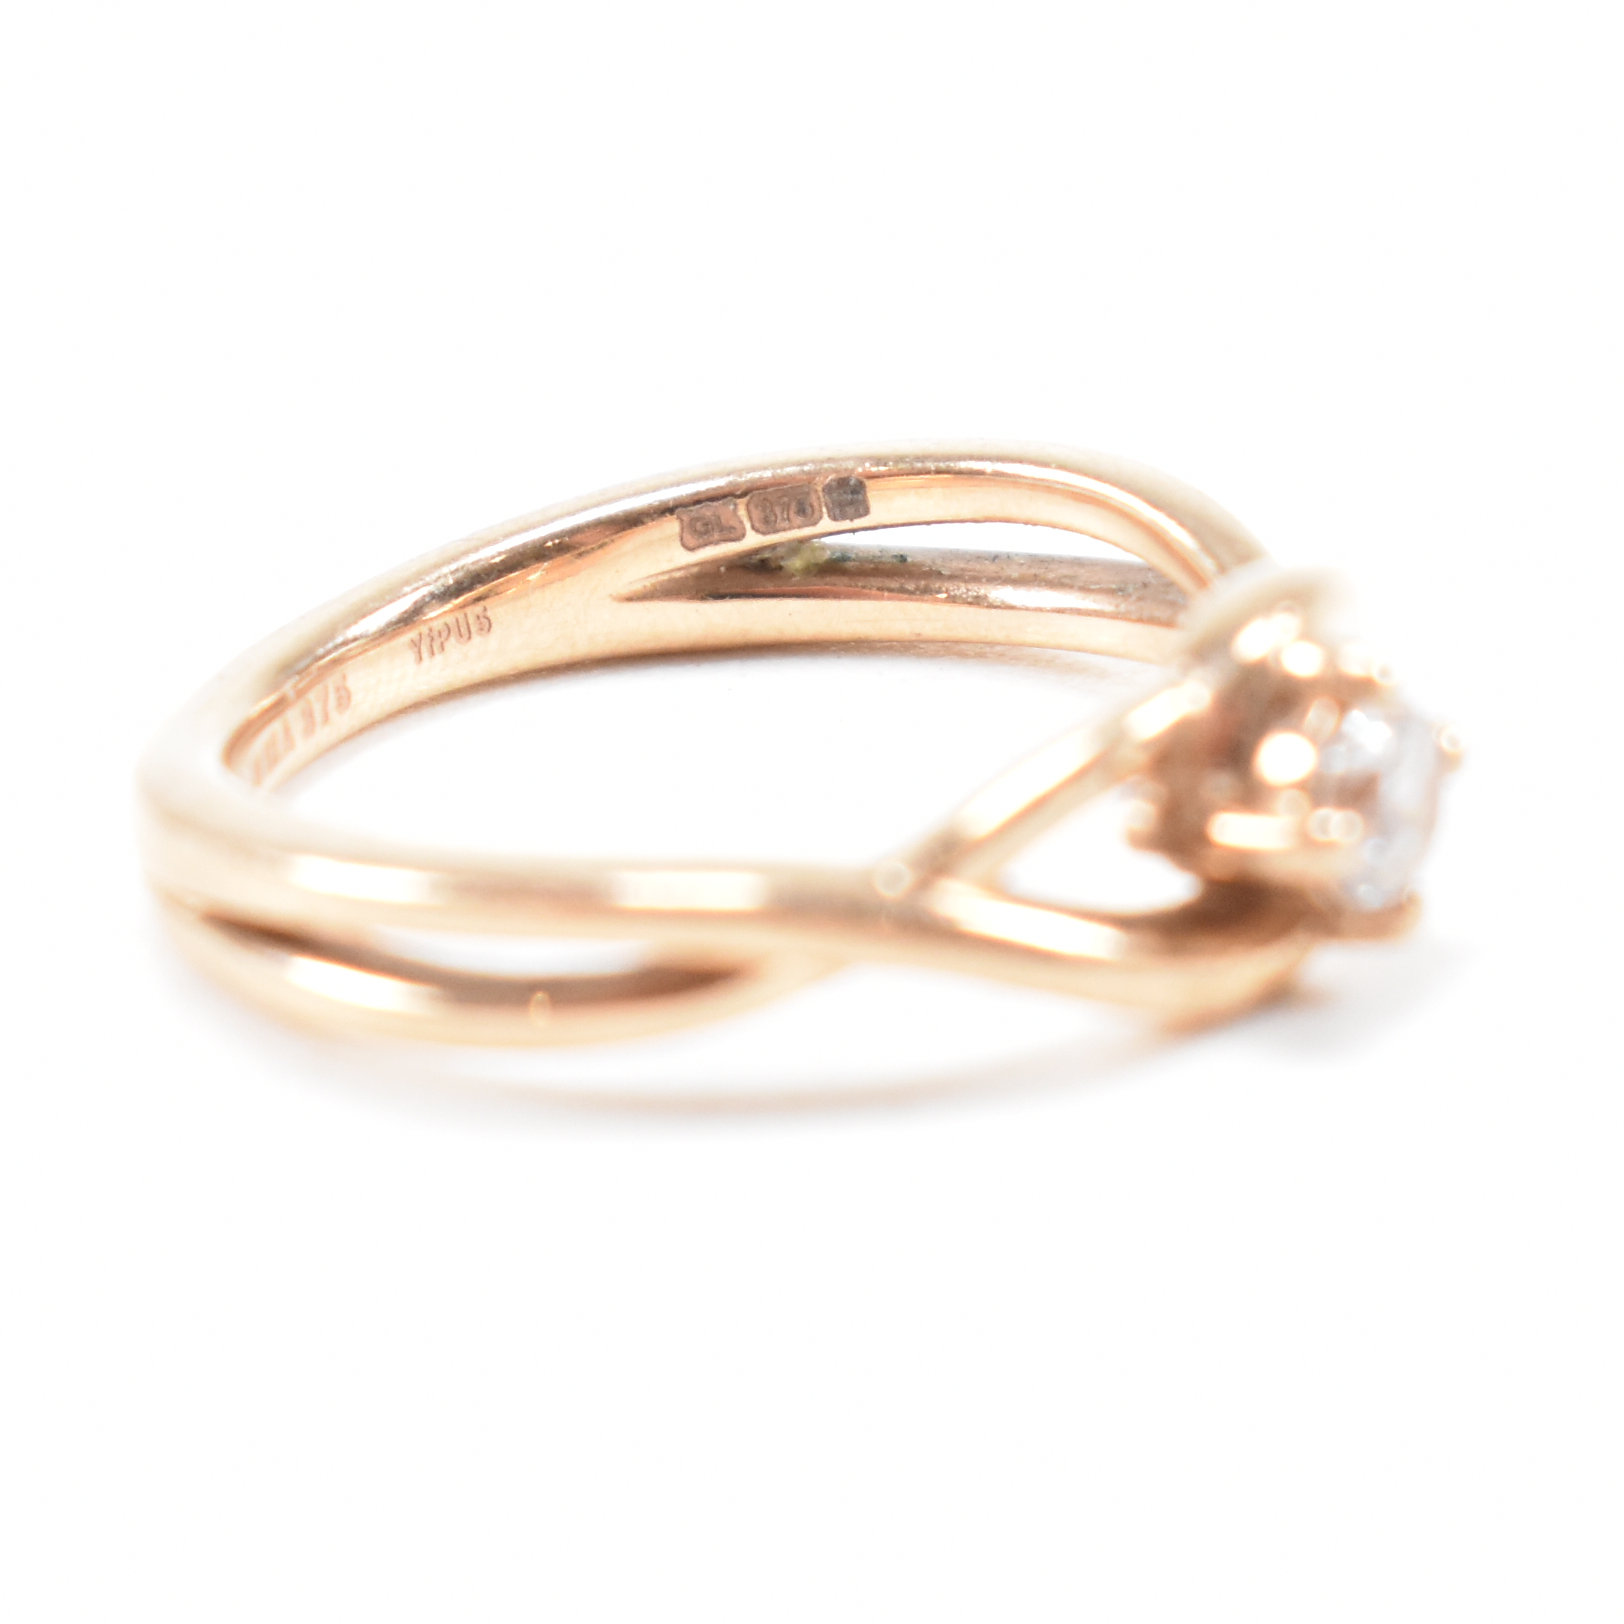 HALLMARKED 9CT ROSE GOLD & WHITE STONE SOLITAIRE CROSSOVER RING - Image 7 of 9